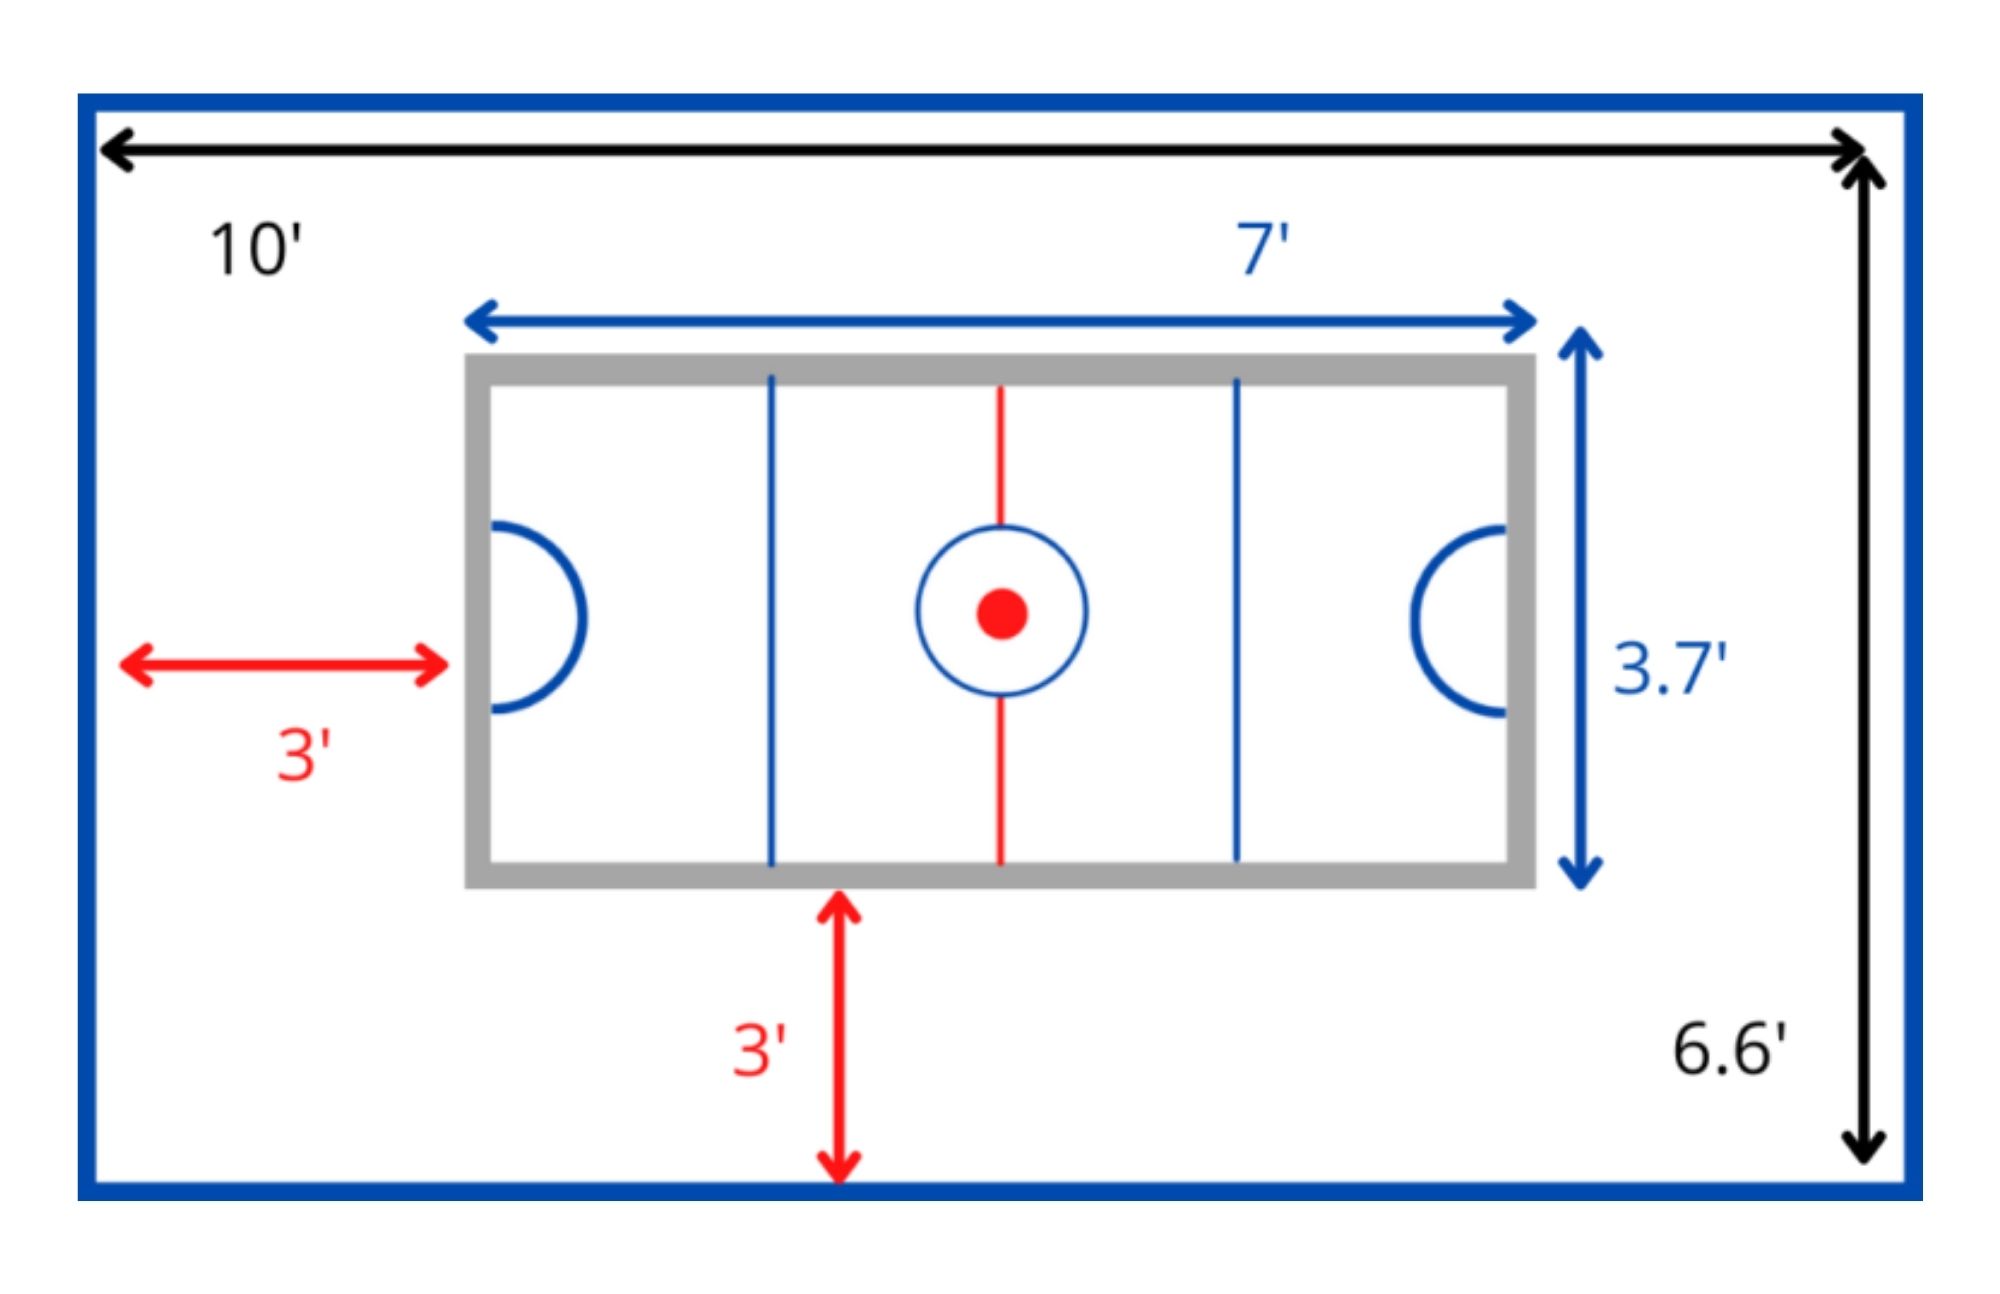 Burds eye view of air hockey table surface with some arrows with corresponding measurements